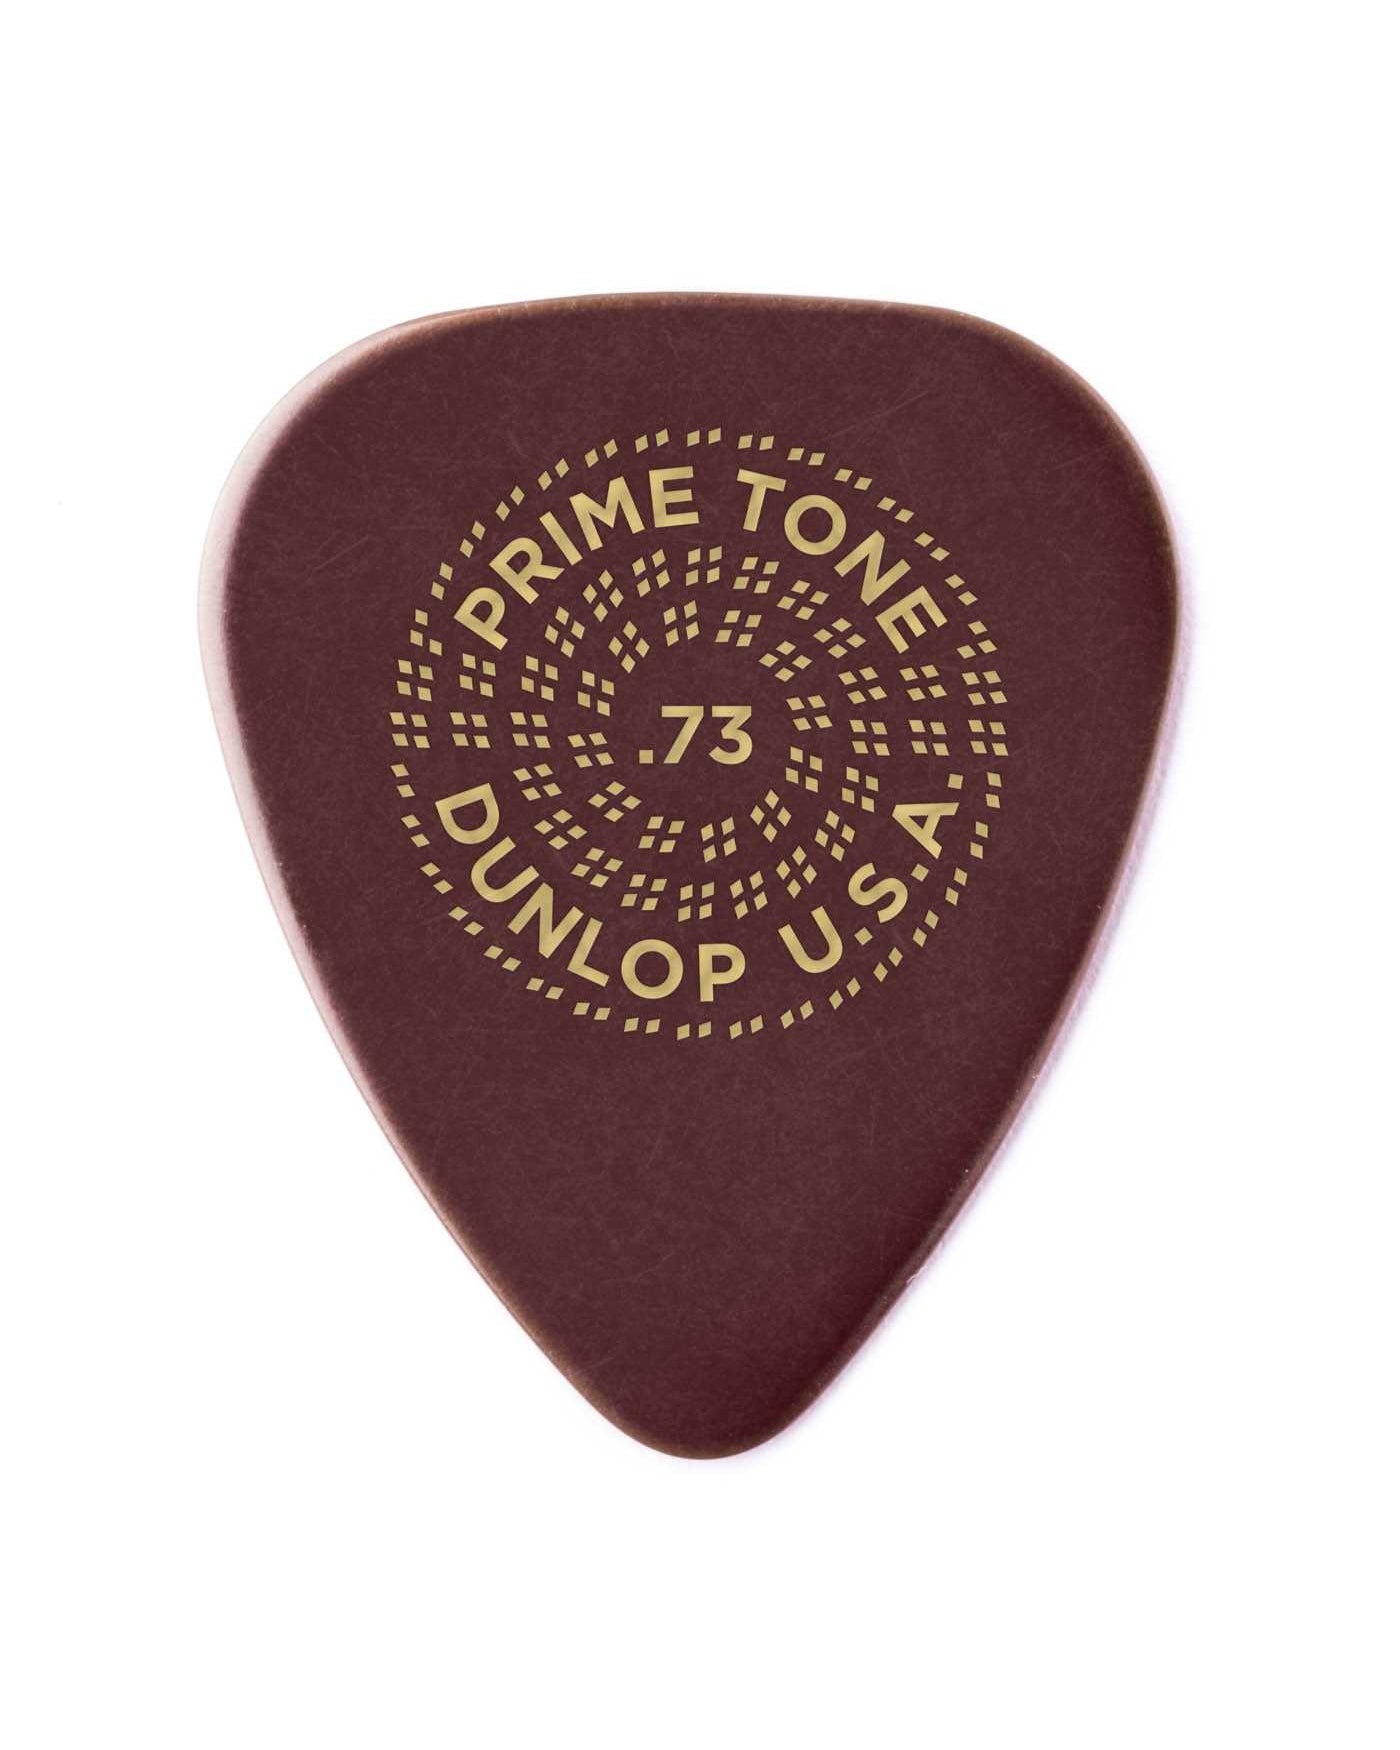 Image 1 of Dunlop Primetone Sculpted Plectra, Ultex Standard, 0.73MM Thick, Three Pack - SKU# PK511-073 : Product Type Accessories & Parts : Elderly Instruments